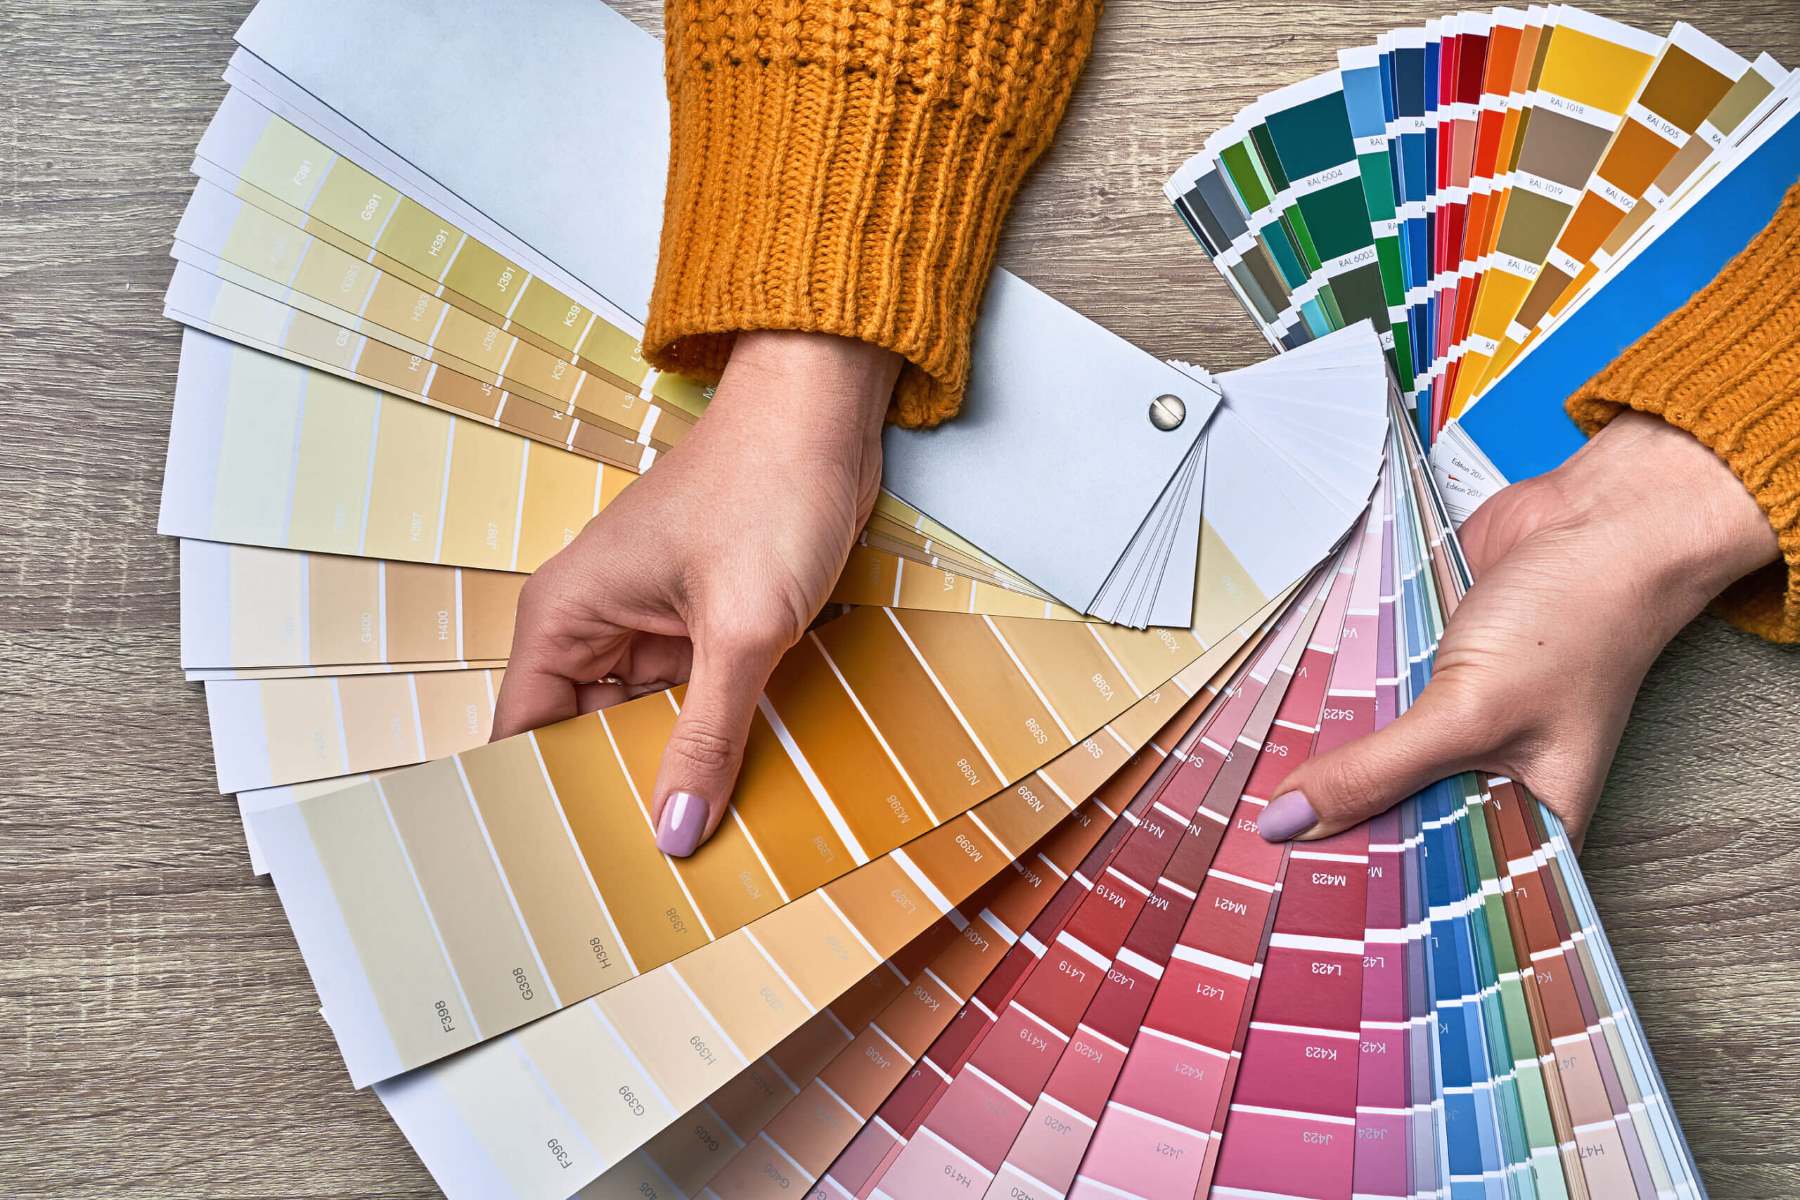 How To Choose The Right Paint For The Interior Of My House